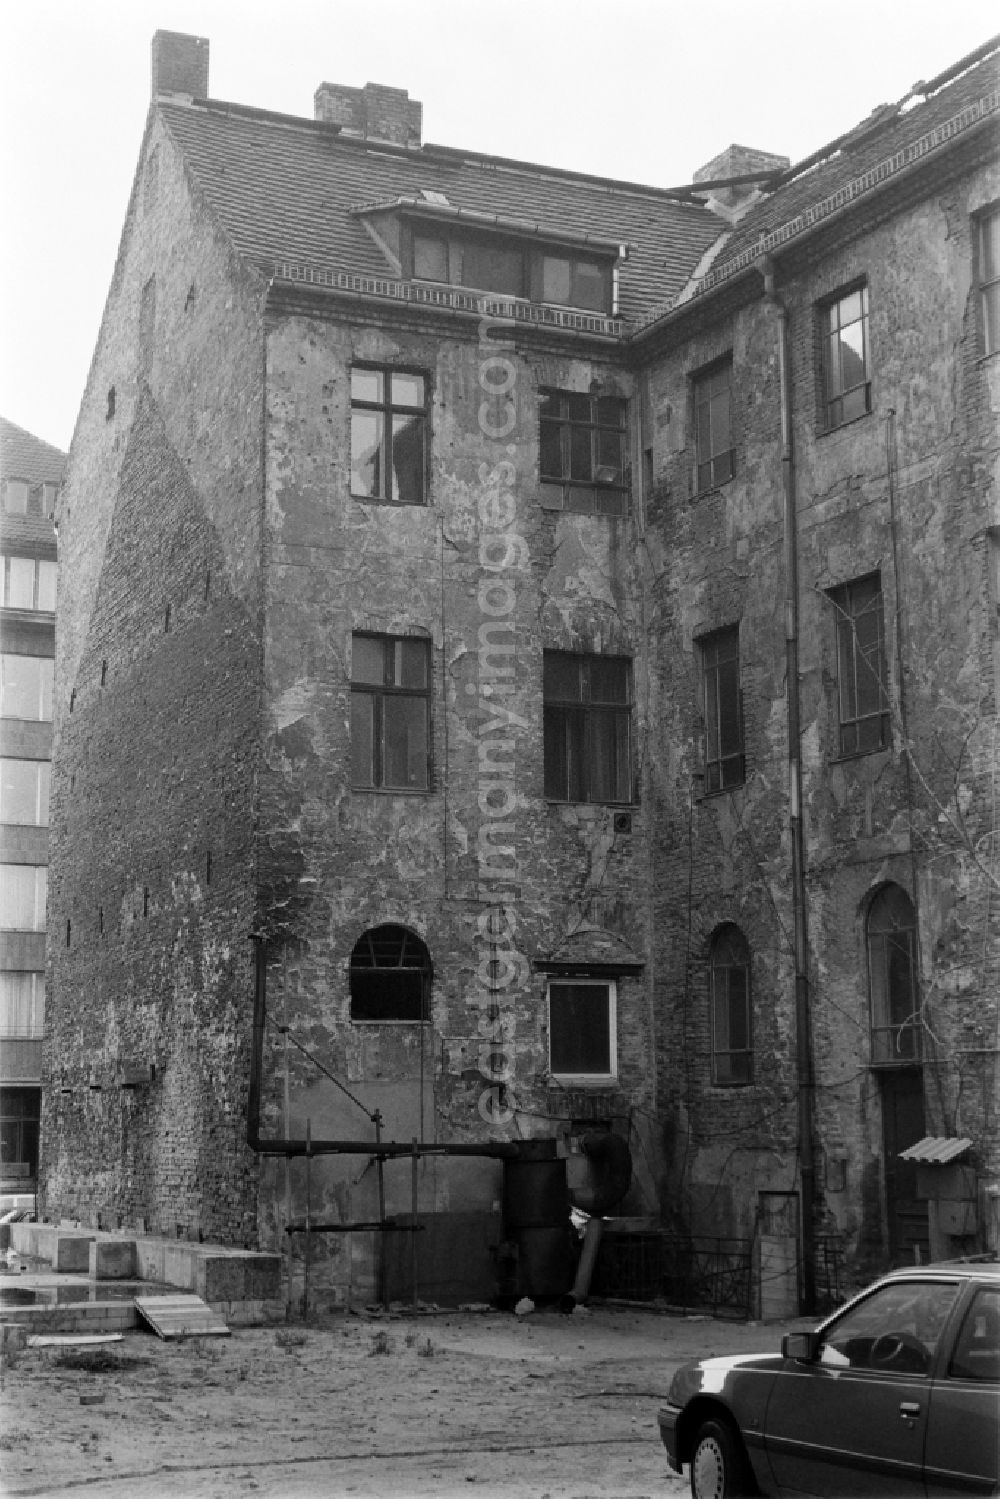 GDR image archive: Berlin - Ruinous old buildings in the vicinity of Oranienburger Strasse in Berlin - Mitte, the former capital of the GDR, German Democratic Republic